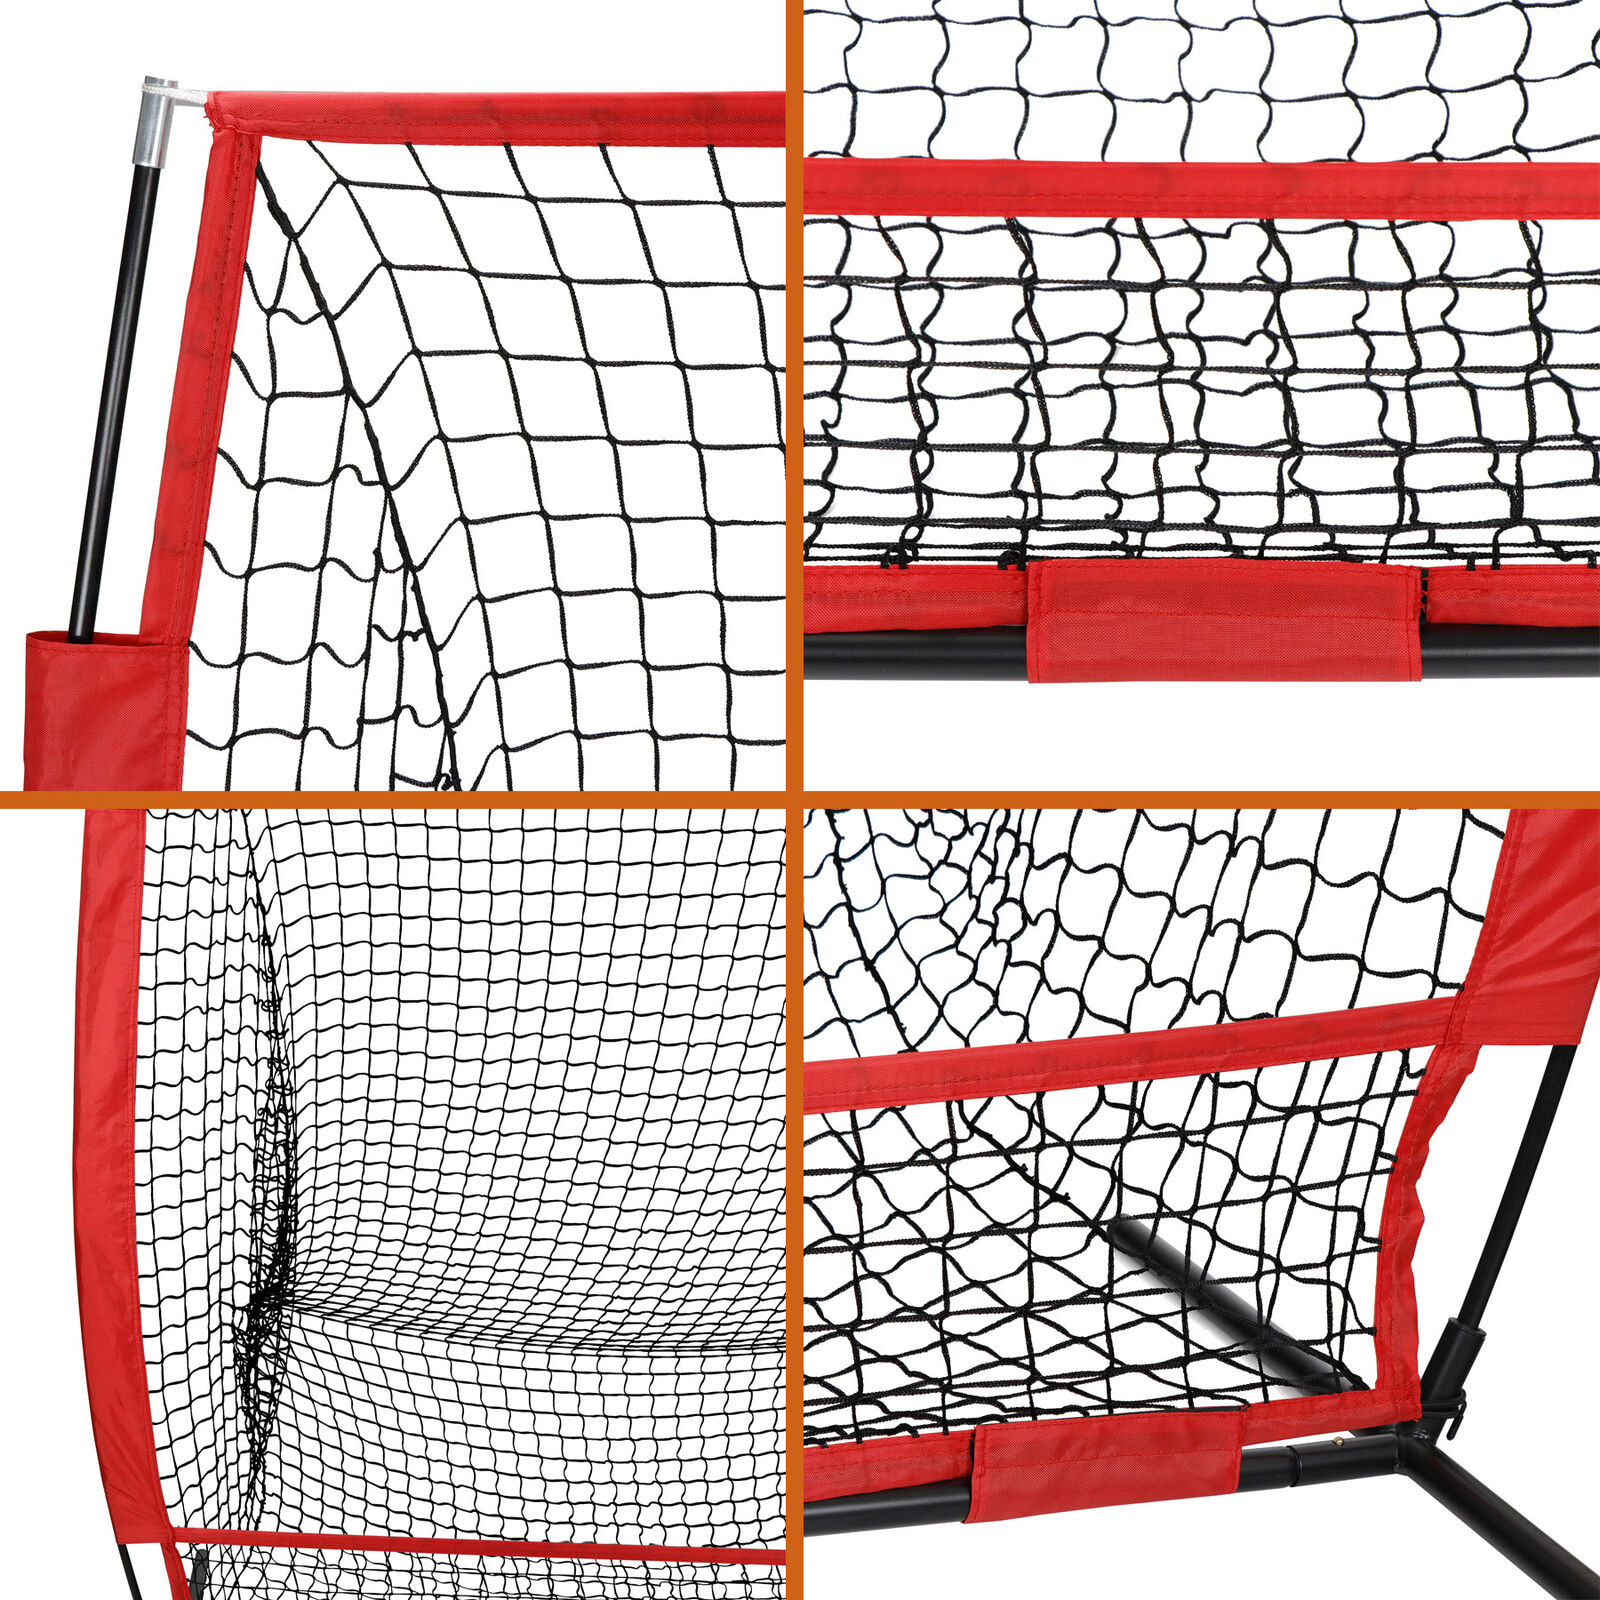 ZenStyle Portable 5 Ft. x 5 Ft. Baseball Softball Practice Net Hitting Pitching Batting Training Net with Carry Bag - image 3 of 10